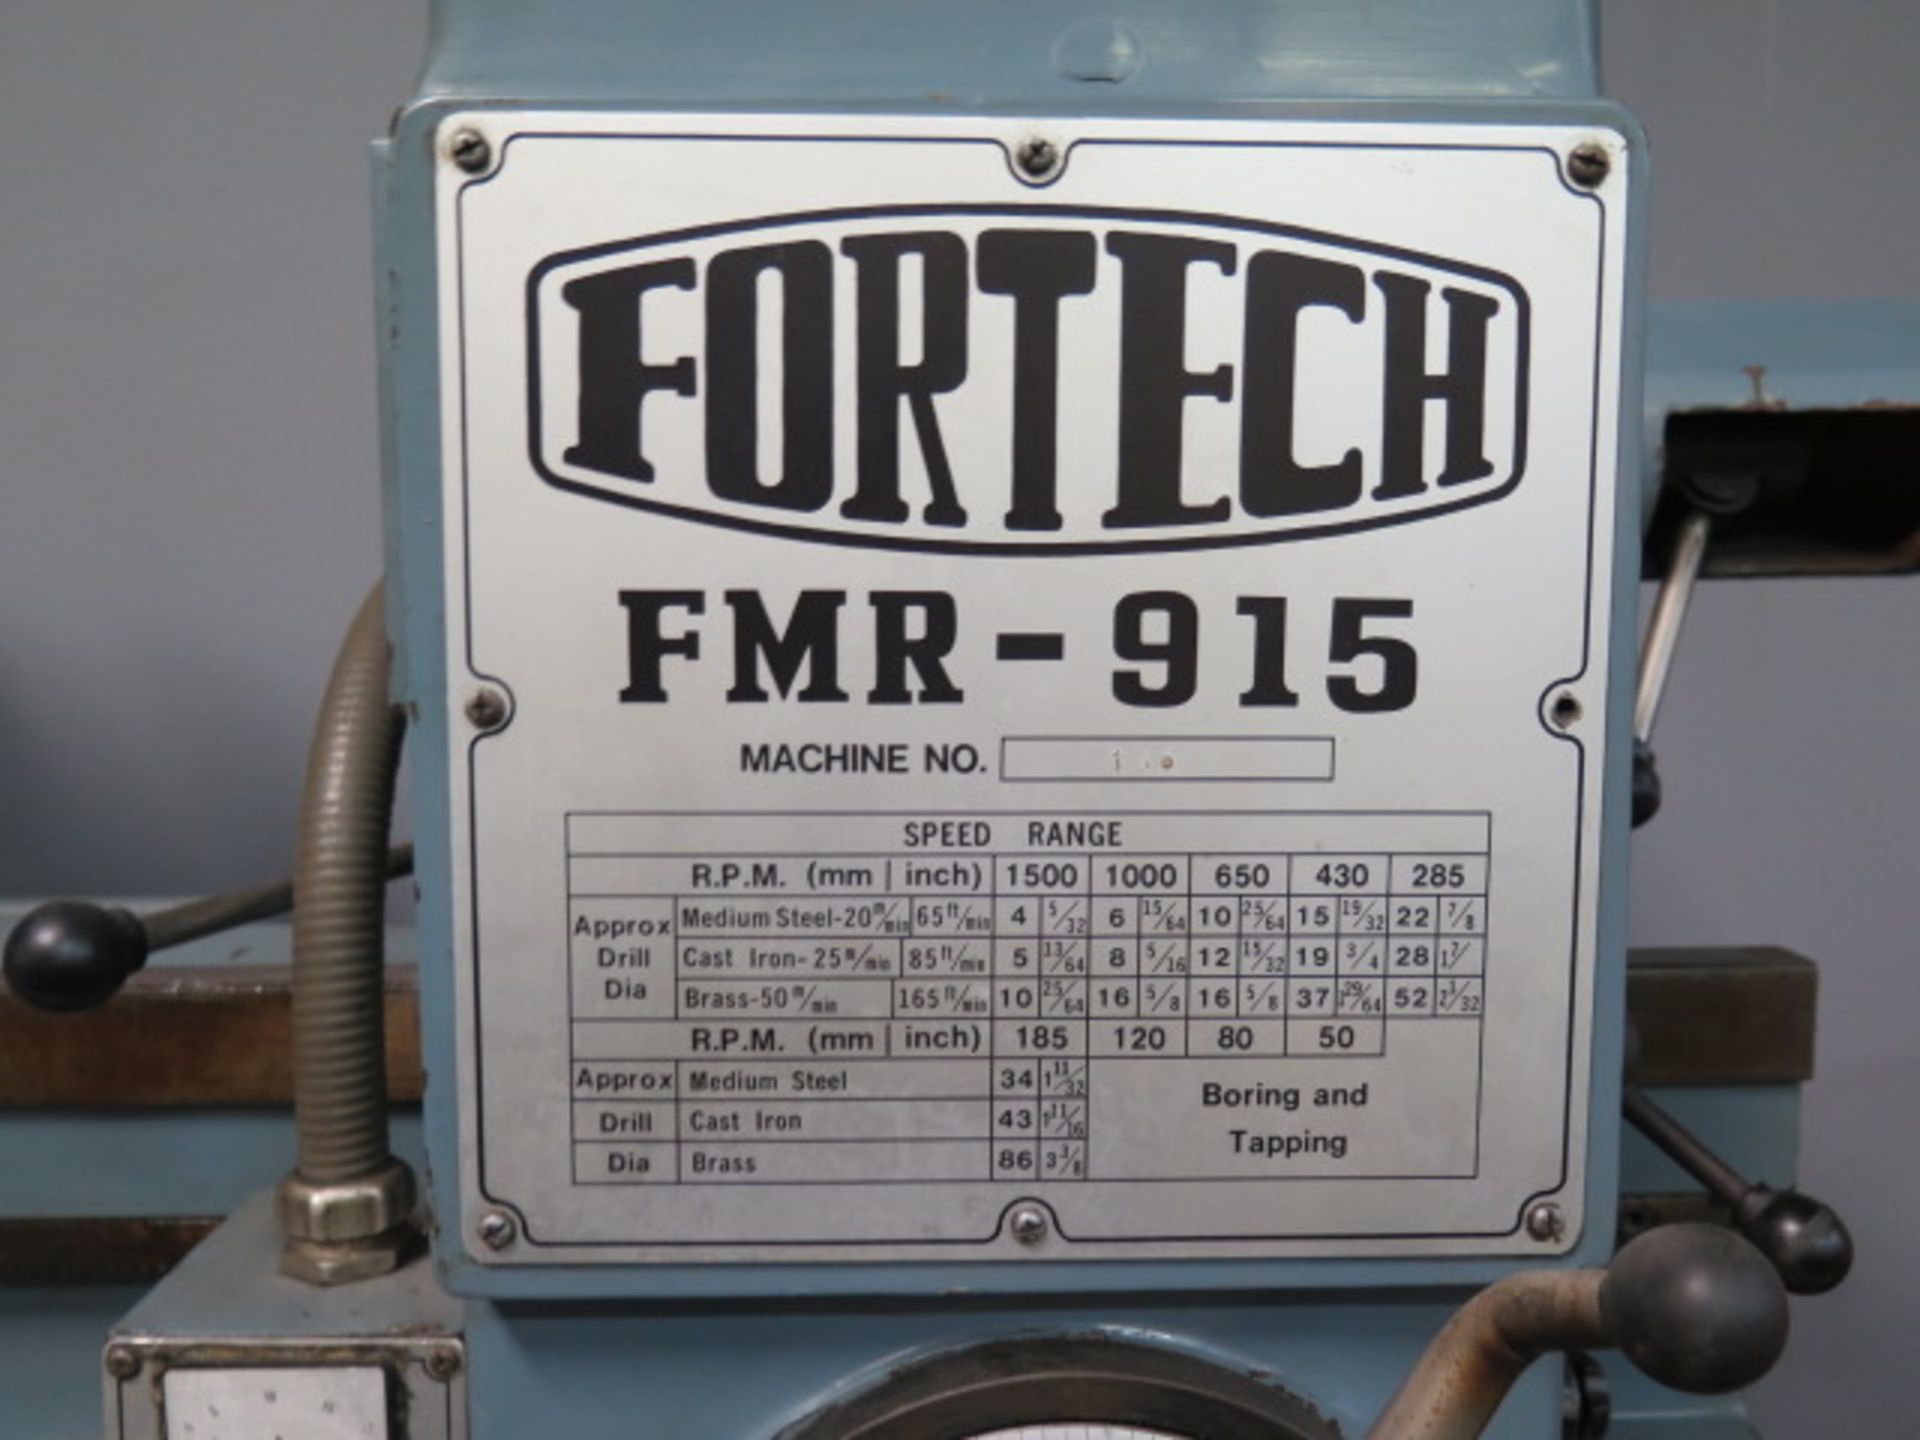 Fortech FMR-915 9" Column x 26" Radial Arm Drill s/n 166 w/ 40-1500 RPM, Power SOLD AS IS - Image 4 of 15